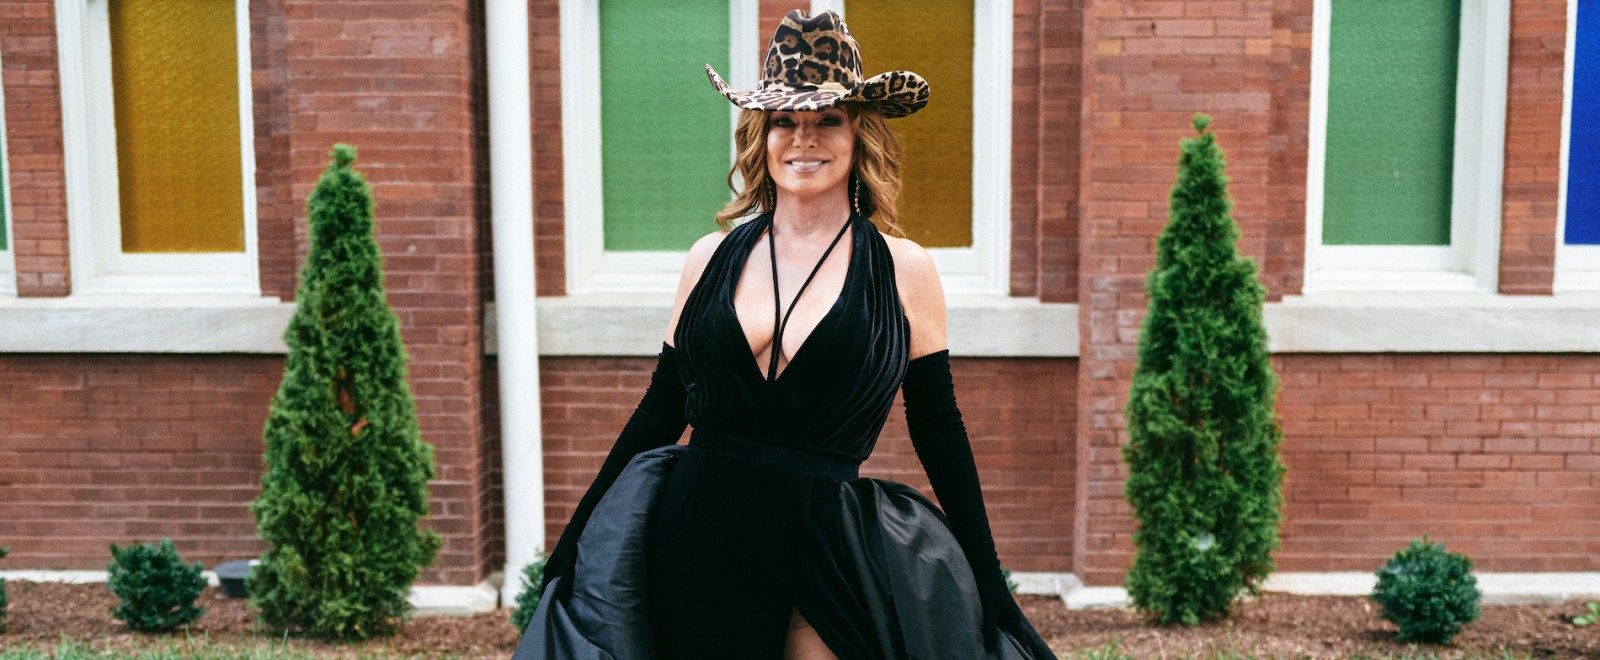 Shania Twain 15th Annual Academy of Country Music Honors at Ryman Auditorium 2022